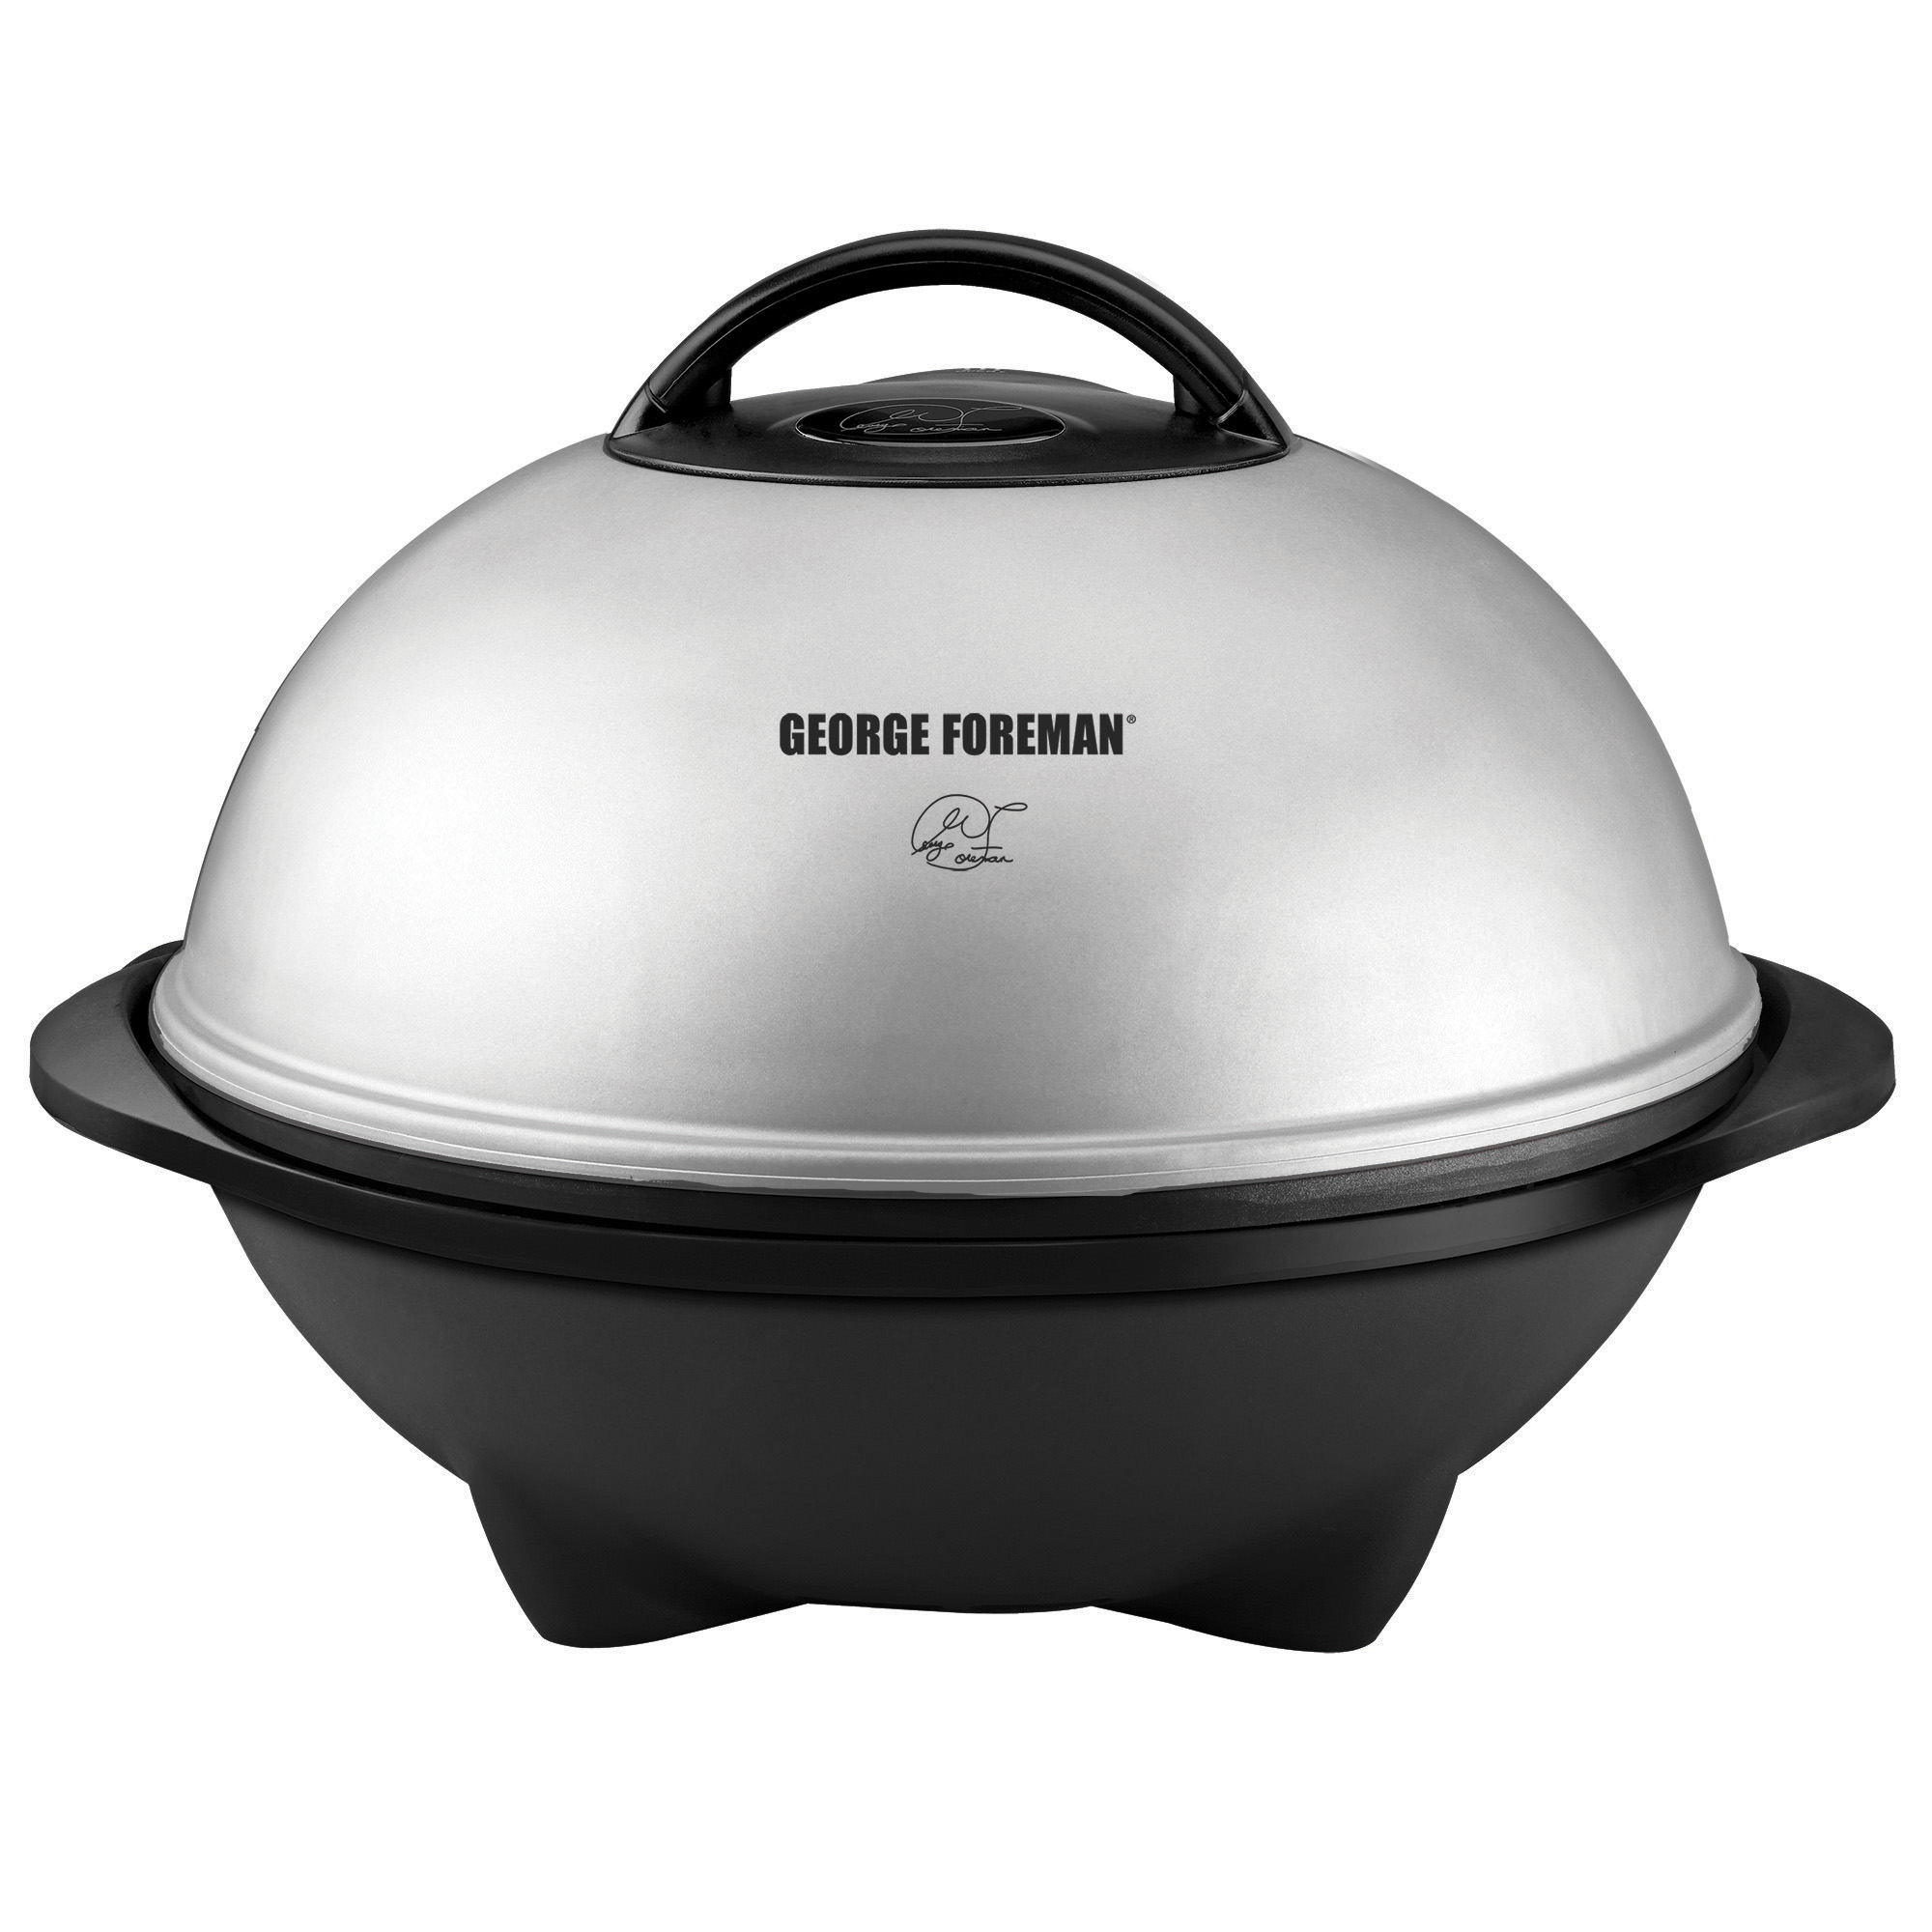 George Foreman 15-Serving Indoor/Outdoor Electric Grill, Silver, GGR50B - image 1 of 11